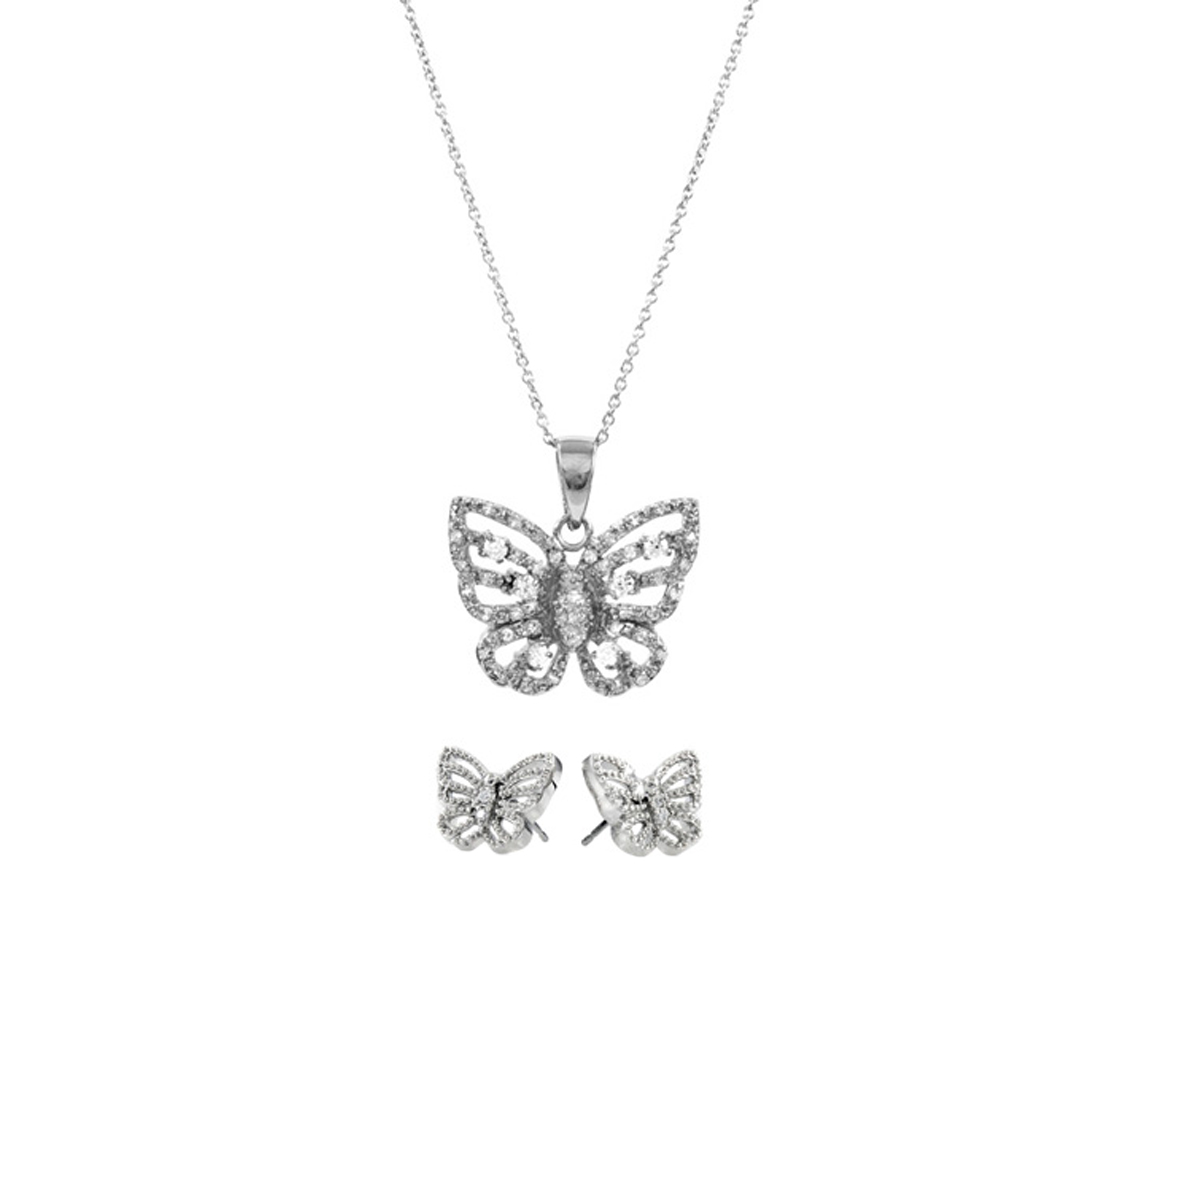 butterfly necklace roll off image to close zoom window EJUTAPB